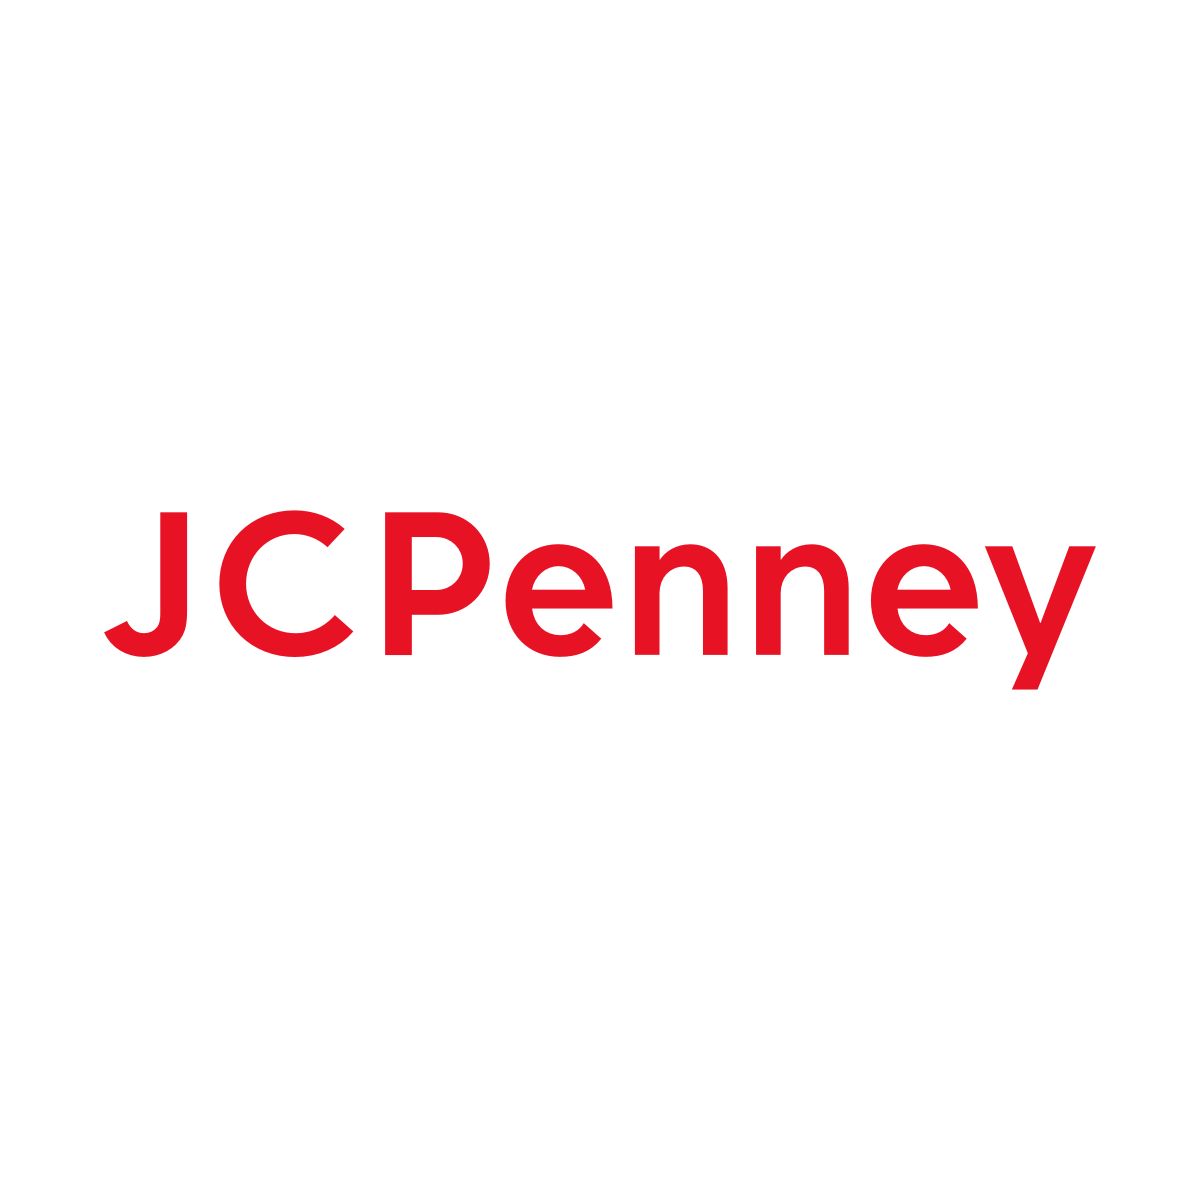 Hair Salon in Tuscaloosa, AL | Haircuts & Color | JCPenney